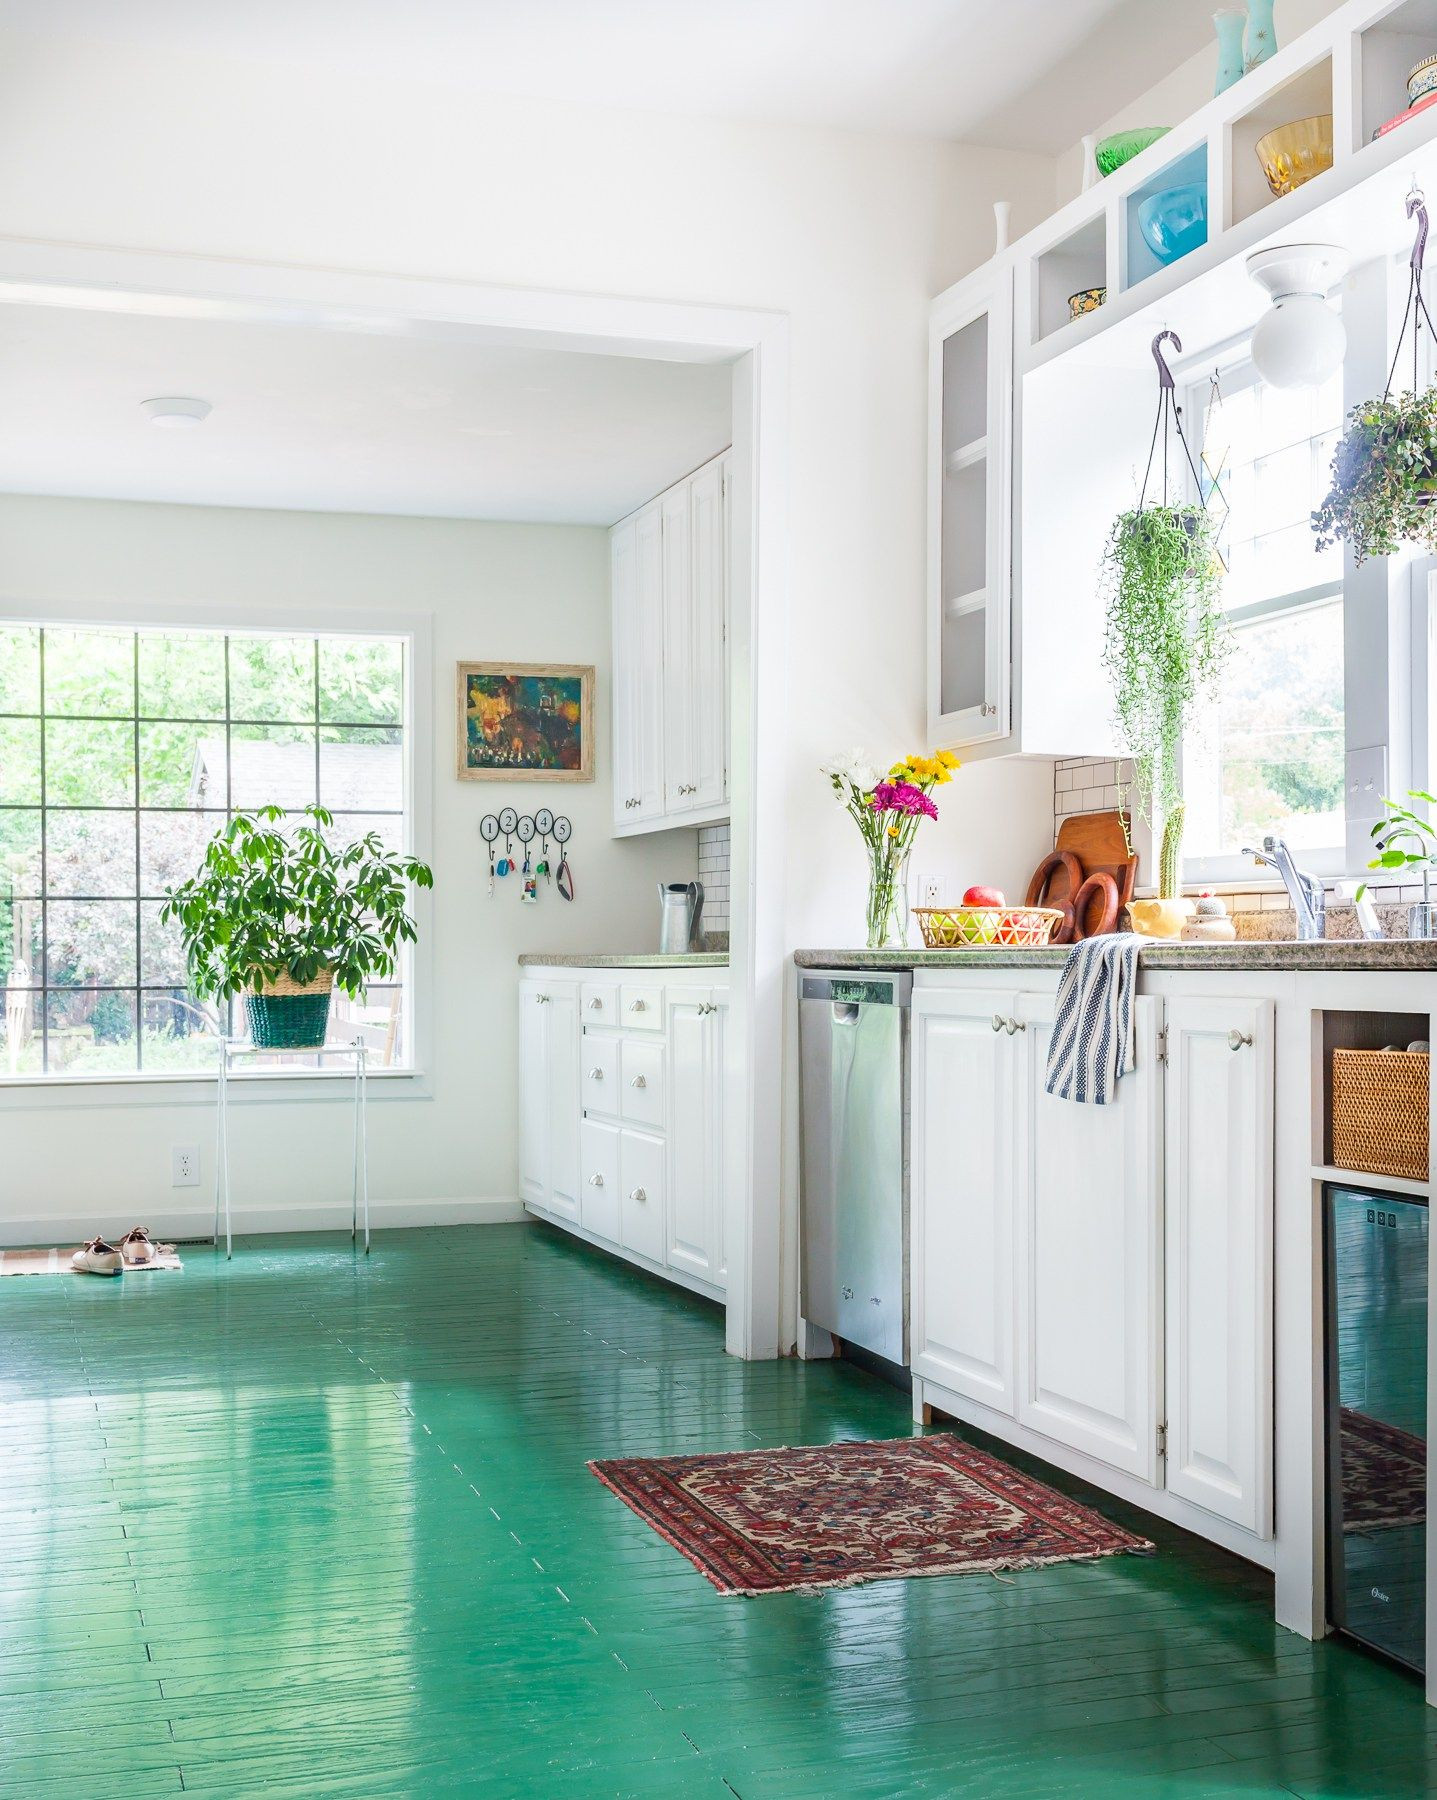 Painting Kitchen Tile Floor
 LOVE this kitchen with its green painted floors so much